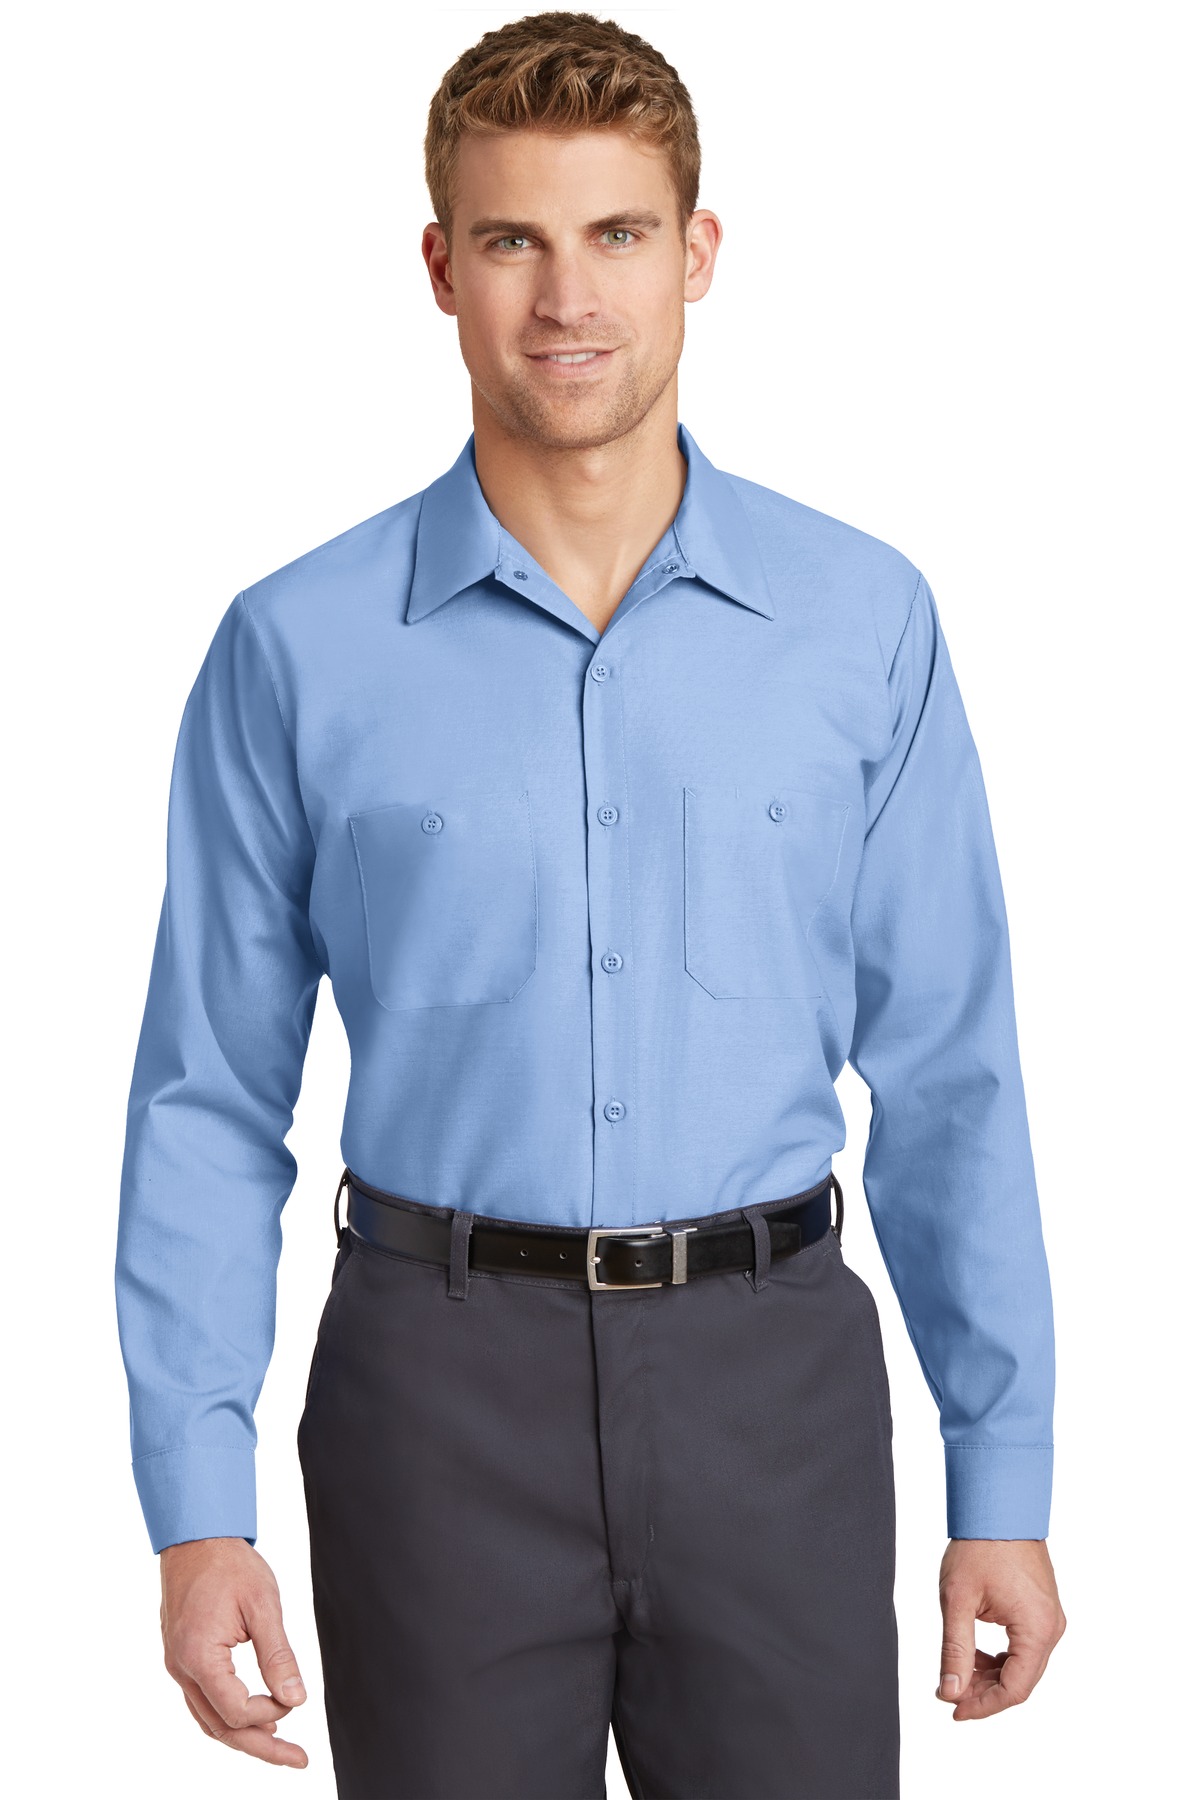 Front view of Long Sleeve Industrial Work Shirt